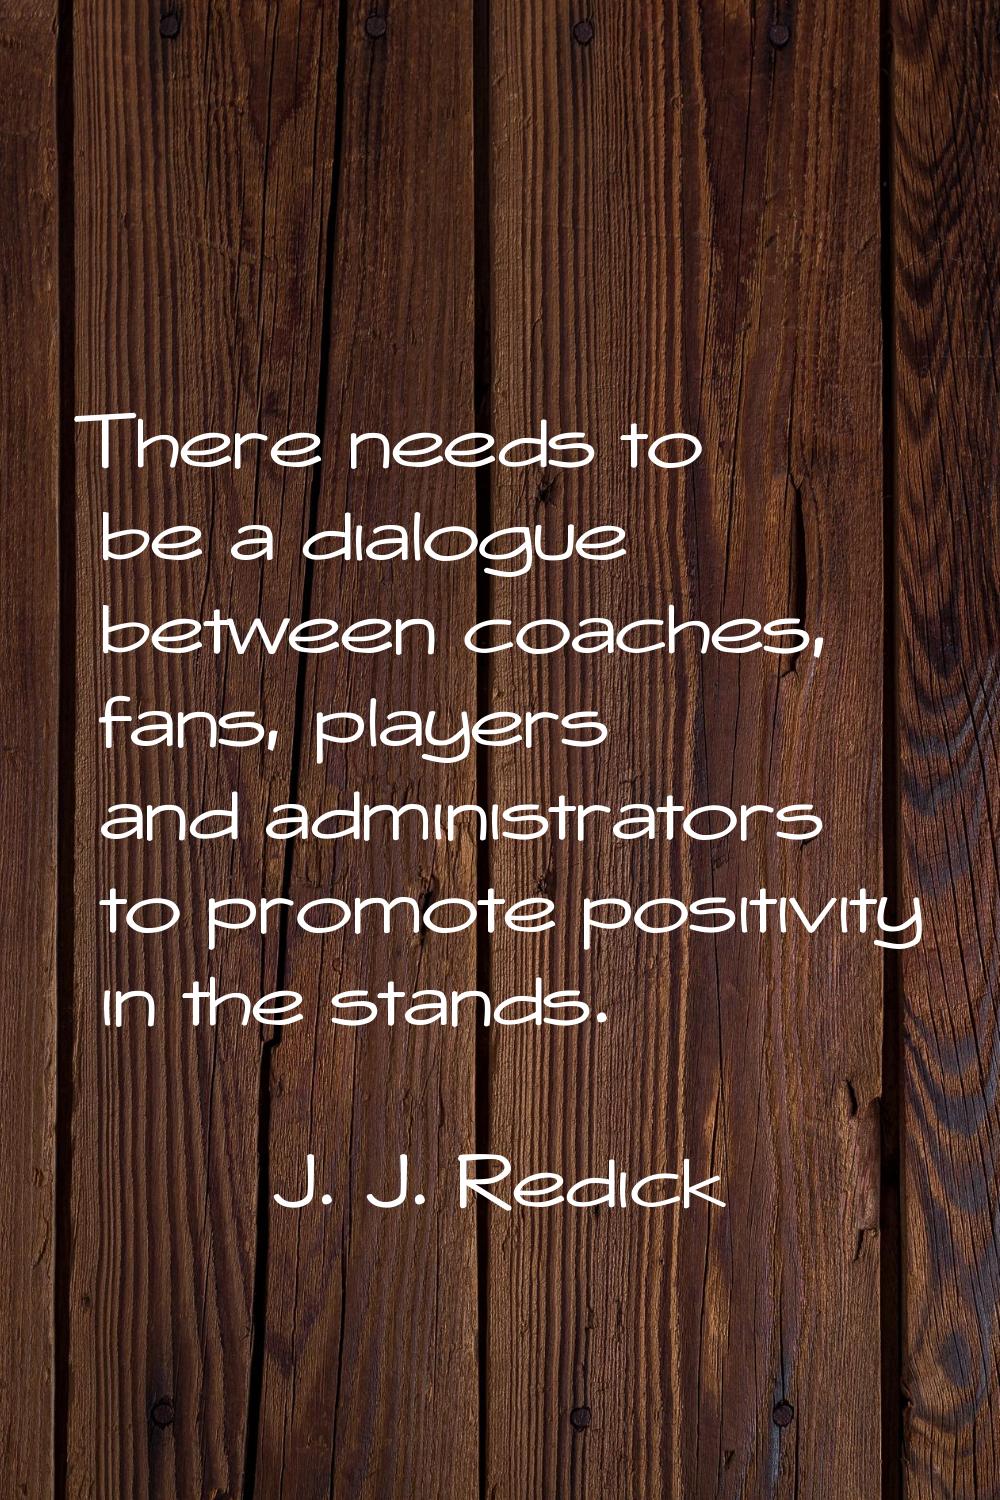 There needs to be a dialogue between coaches, fans, players and administrators to promote positivit